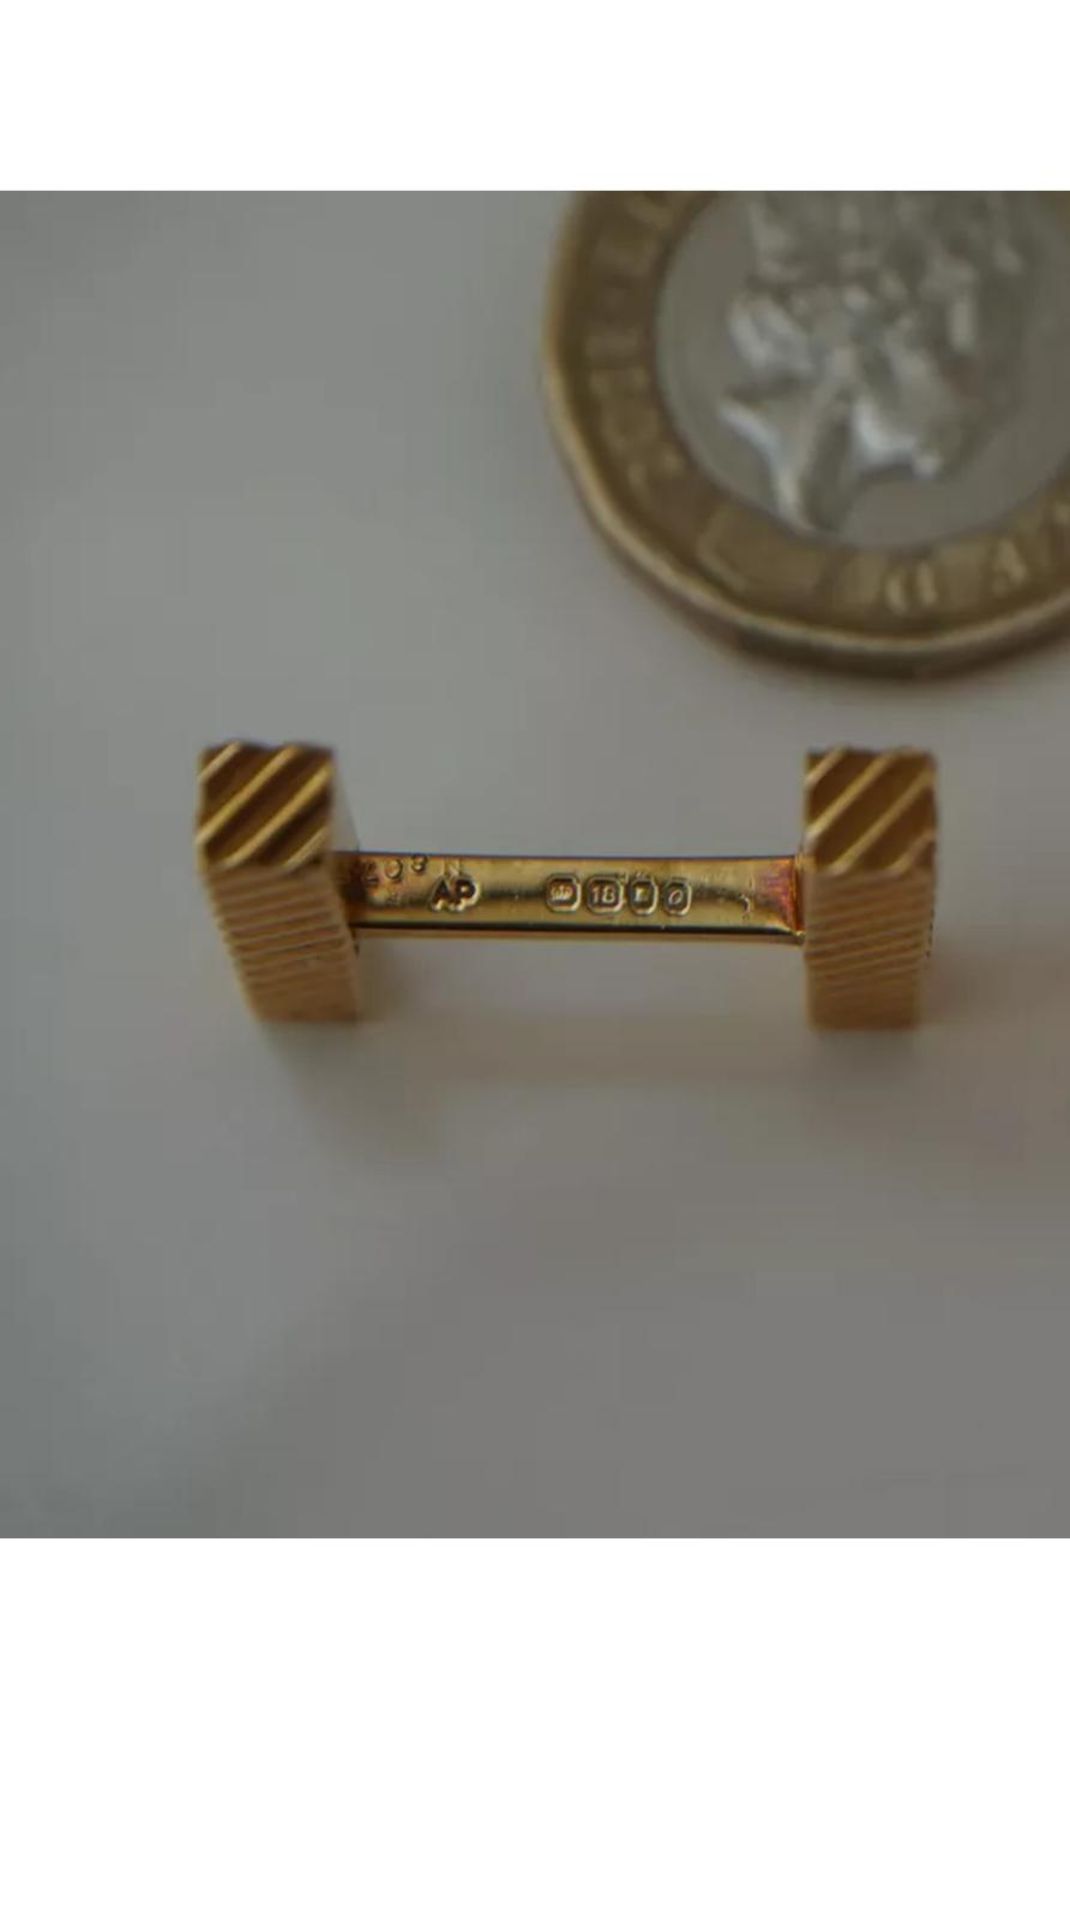 Stunning & Fine Vintage Cartier 18ct Yellow Gold Cuff Links in their Original Cartier Box - Image 4 of 7